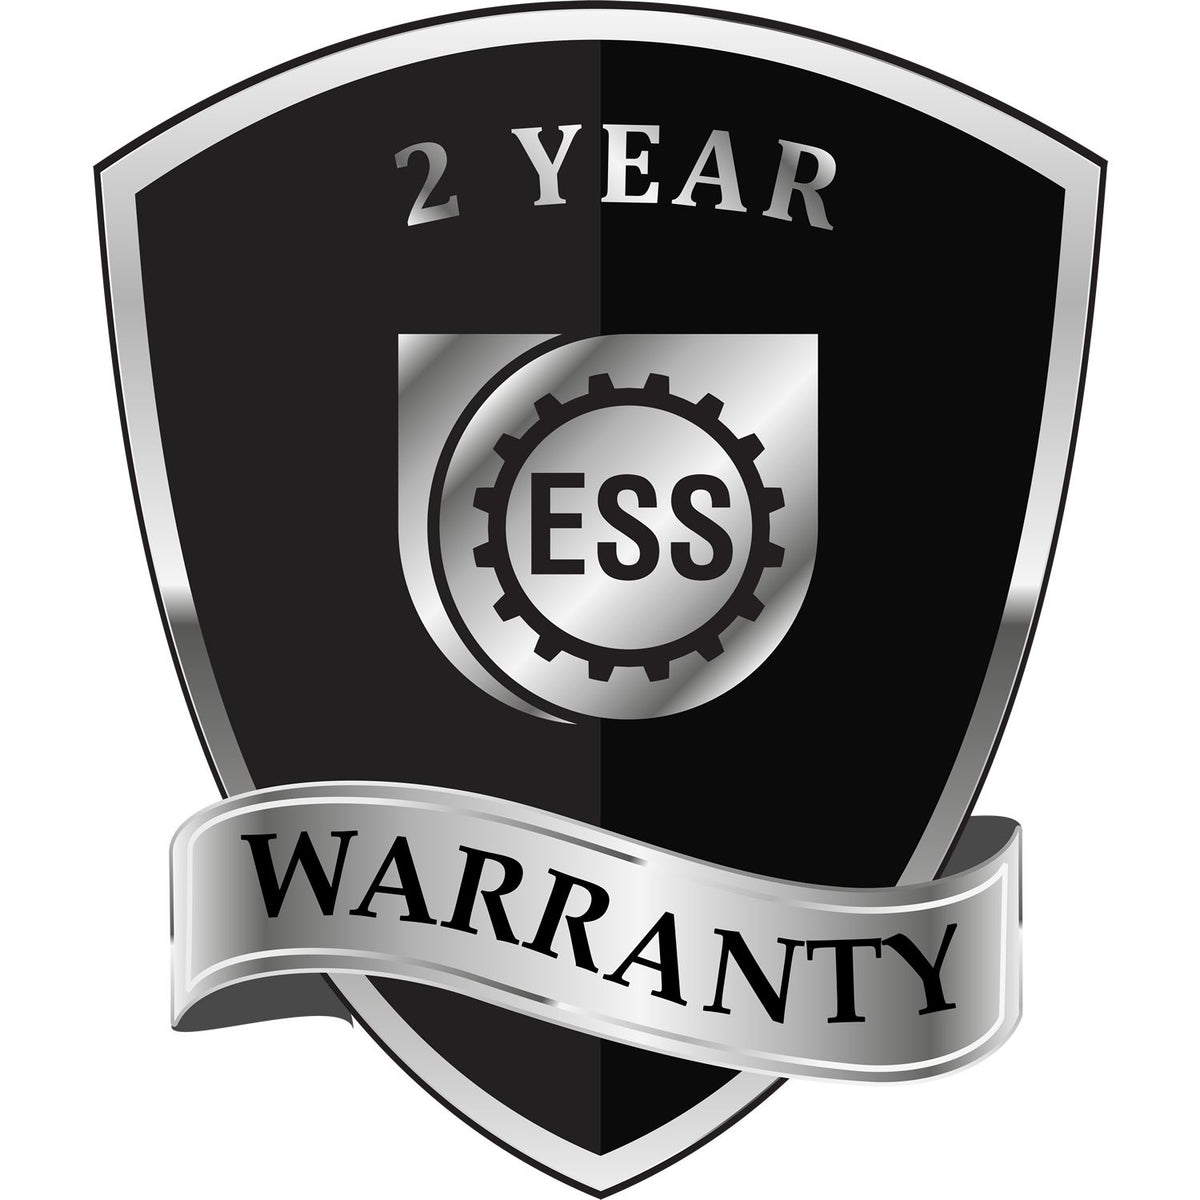 A black and silver badge or emblem showing warranty information for the Soft Mississippi Professional Geologist Seal